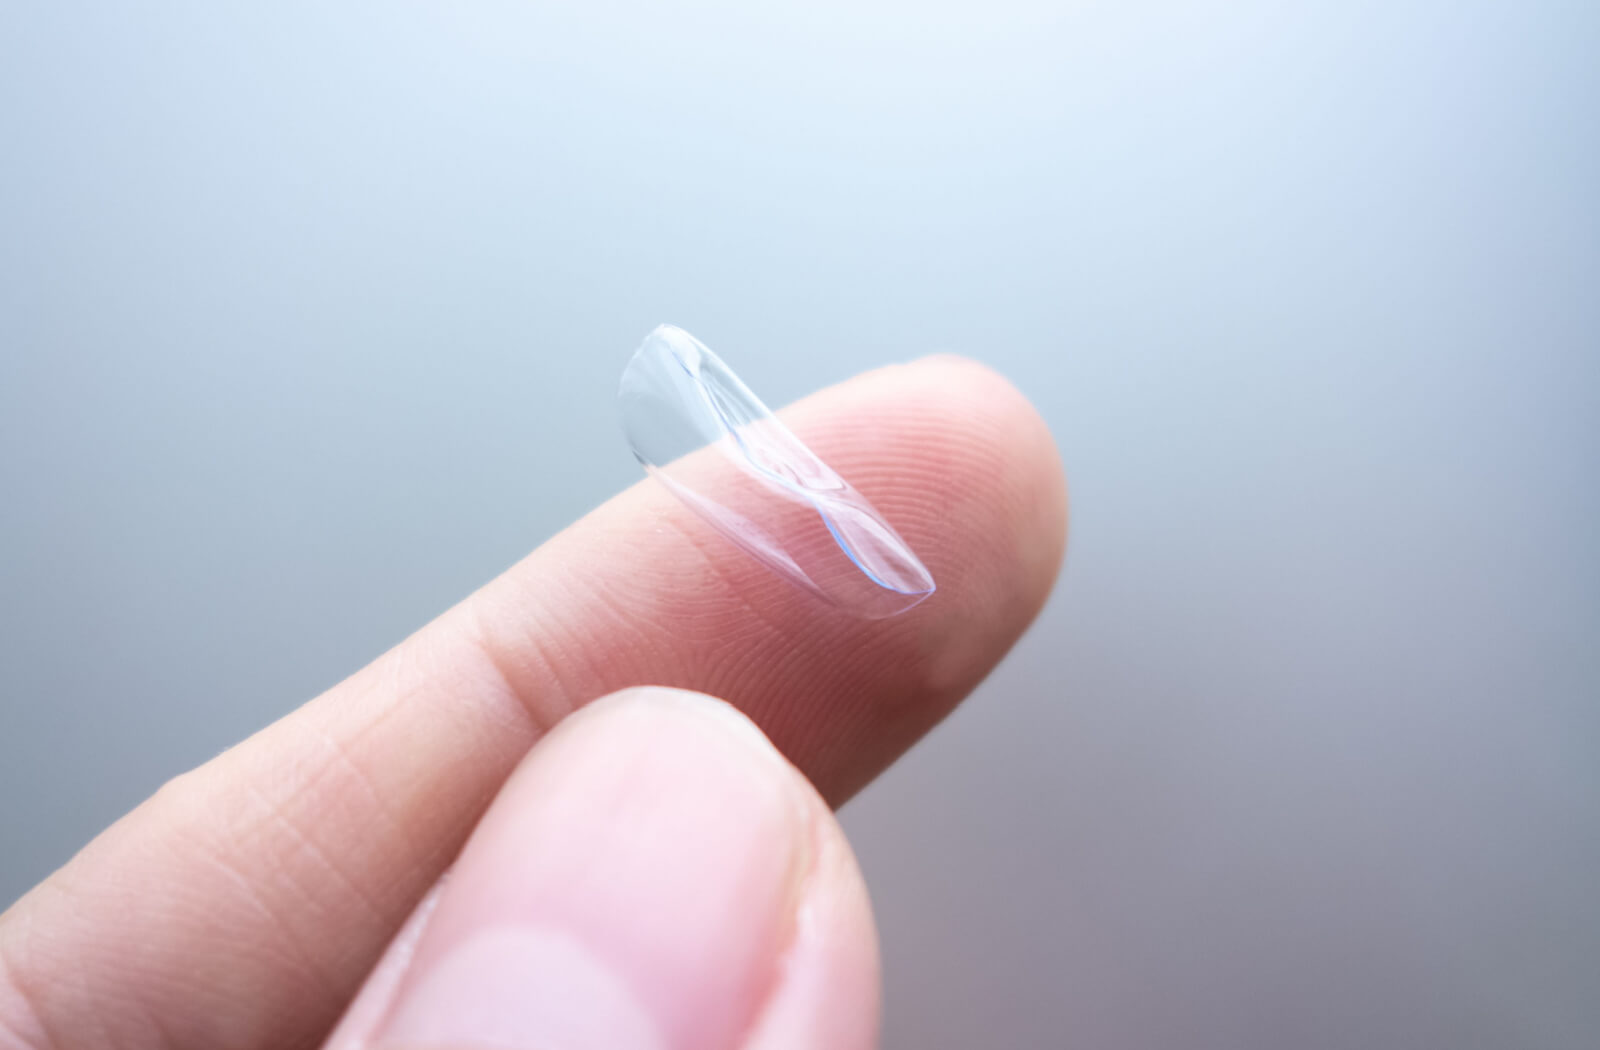 A warped contact lens on a person's finger.